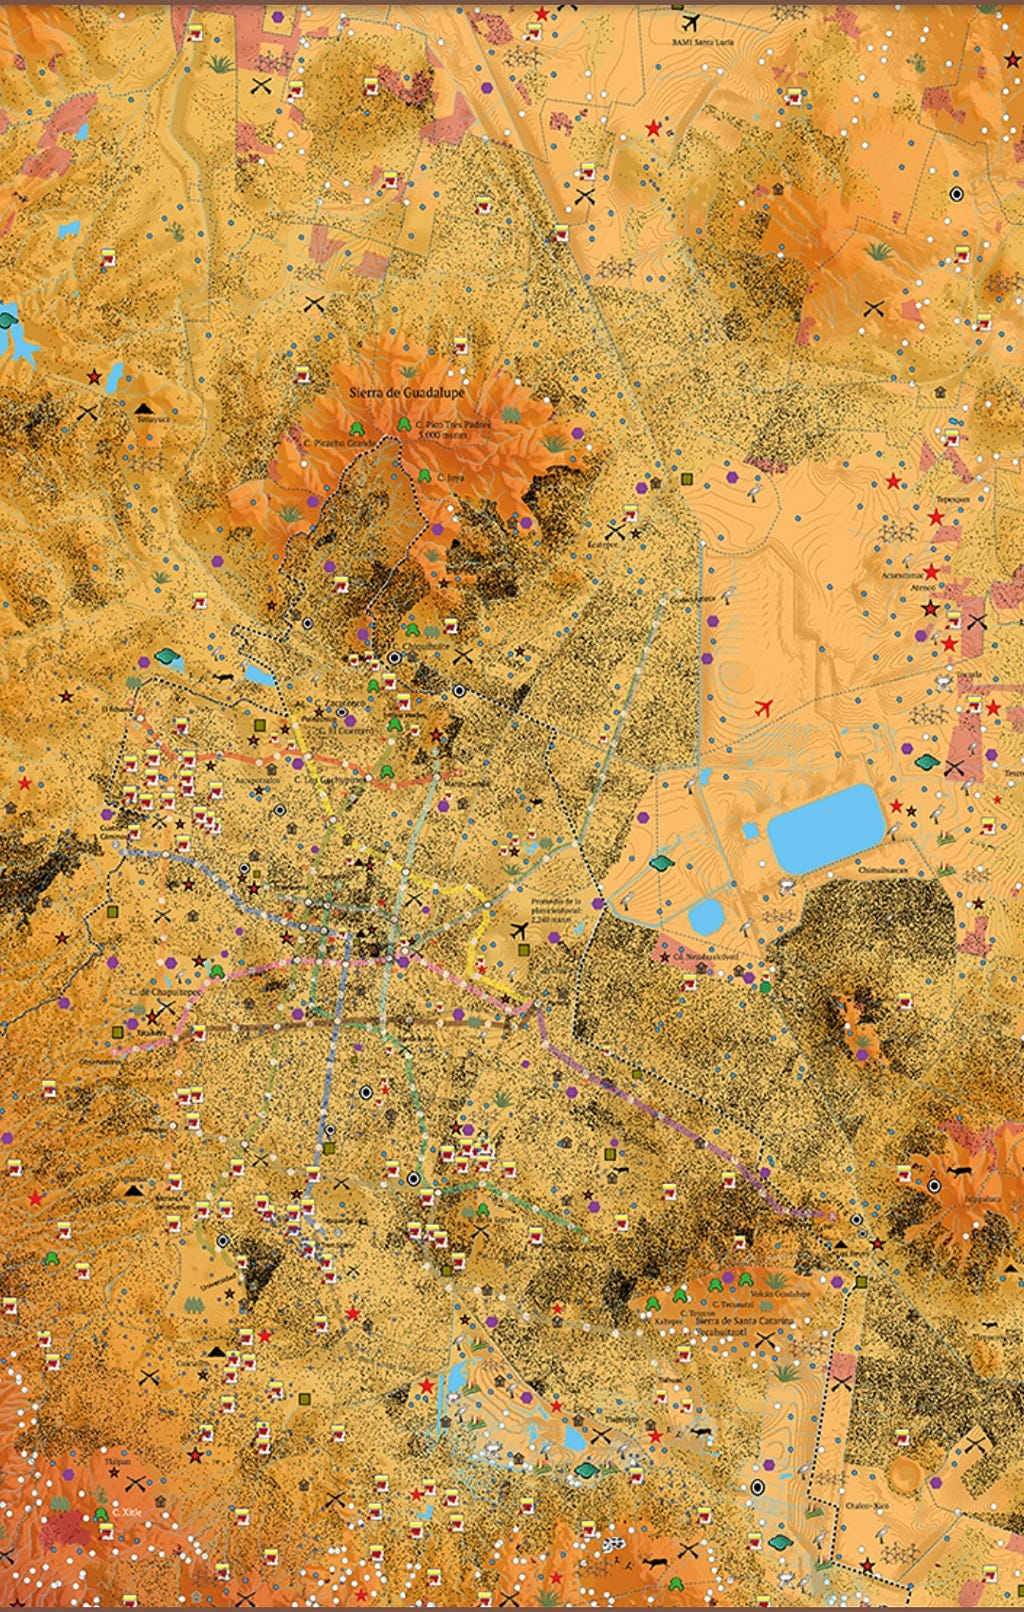 Close-up of Mexico City mapped. Those swarm-like dots are the indigeous people living there.